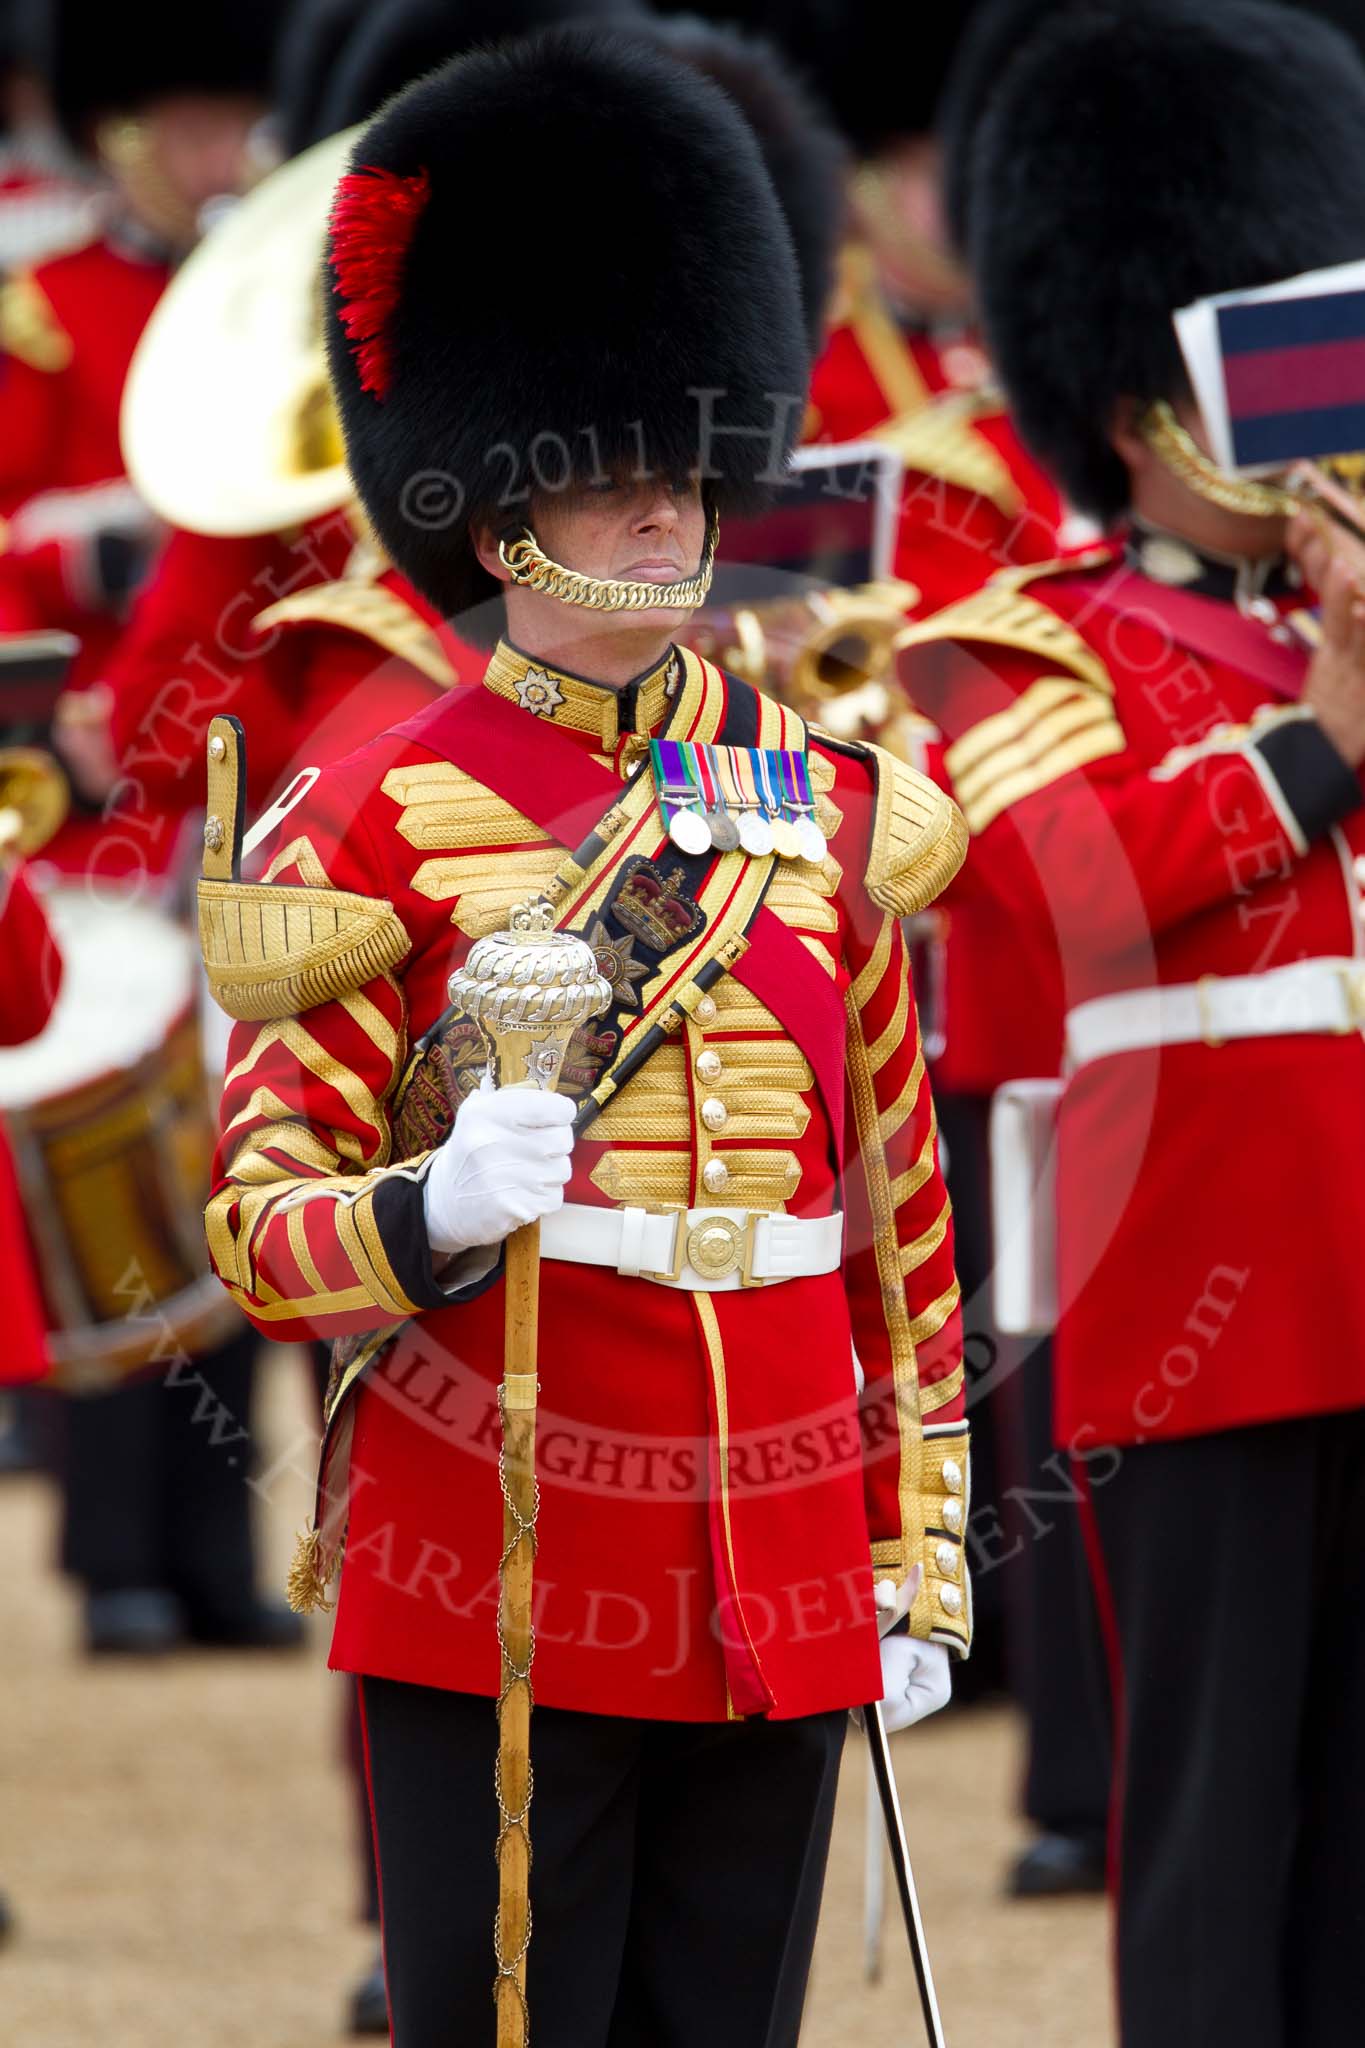 The Major General's Review 2011: Drum Major Tony Taylor, No. 7 Company Coldstream Guards, leading the Band of the Irish Guards..
Horse Guards Parade, Westminster,
London SW1,
Greater London,
United Kingdom,
on 28 May 2011 at 11:39, image #215